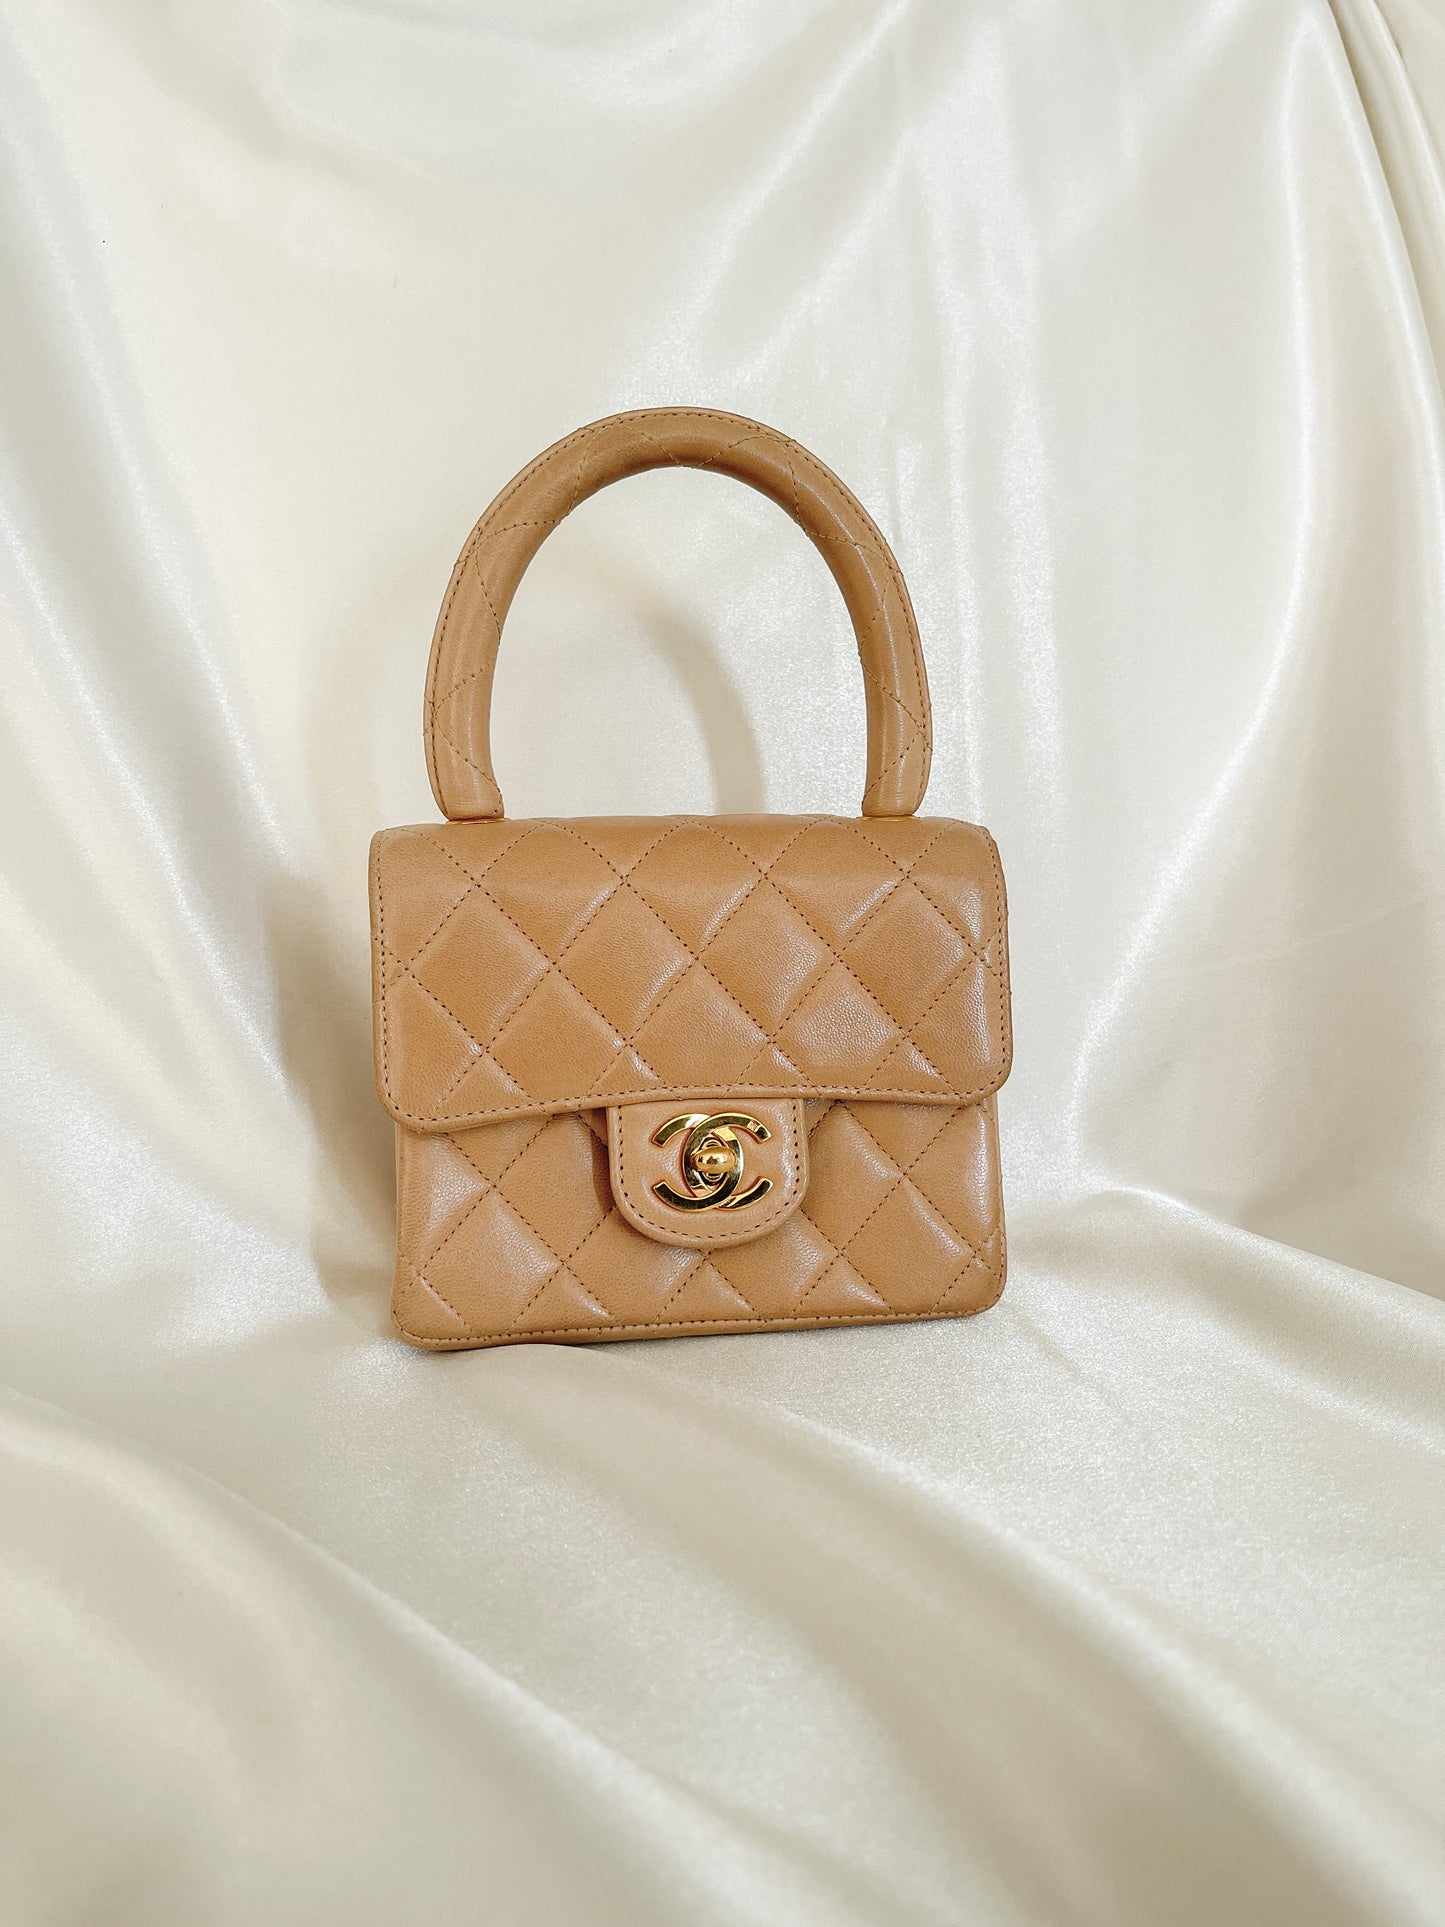 1990s Chanel Lambskin Quilted Mini Top Handle Bag